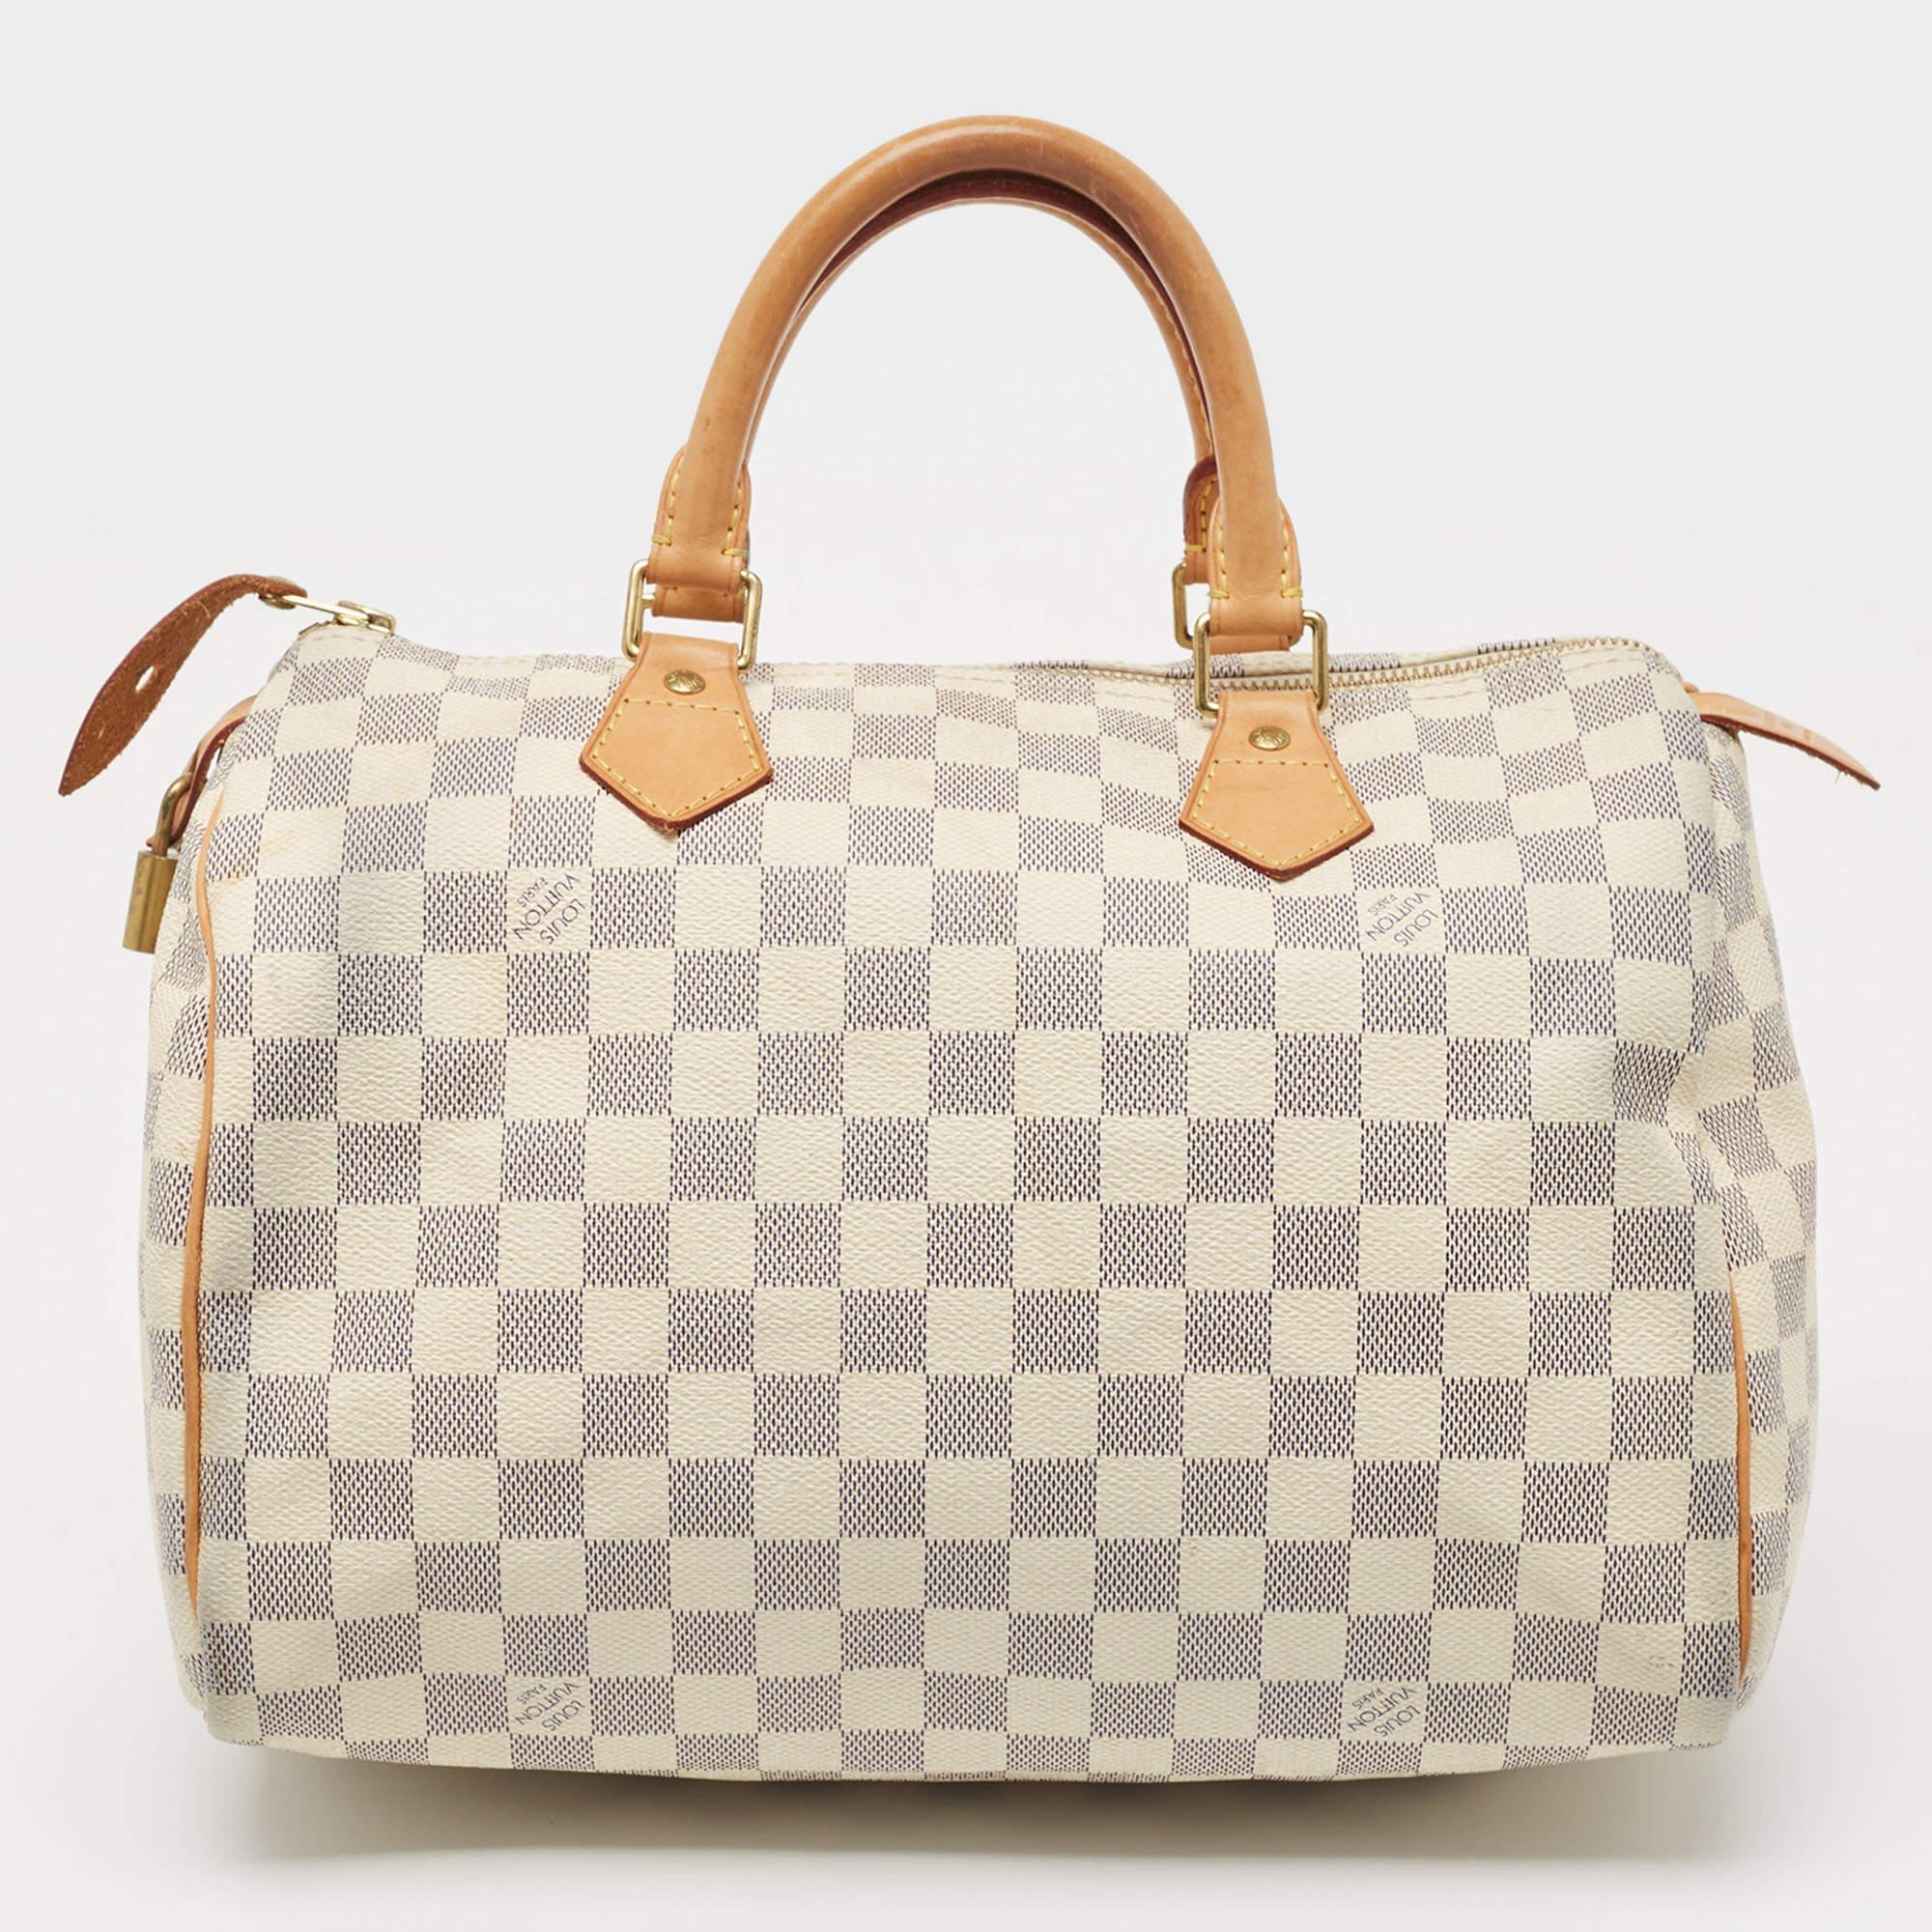 Created to provide you with everyday ease, this Louis Vuitton Speedy 30 bag features dual top handles and a roomy fabric-lined interior. The usage of the signature Damier Azur canvas in its construction offers instant brand identification. Gold-tone